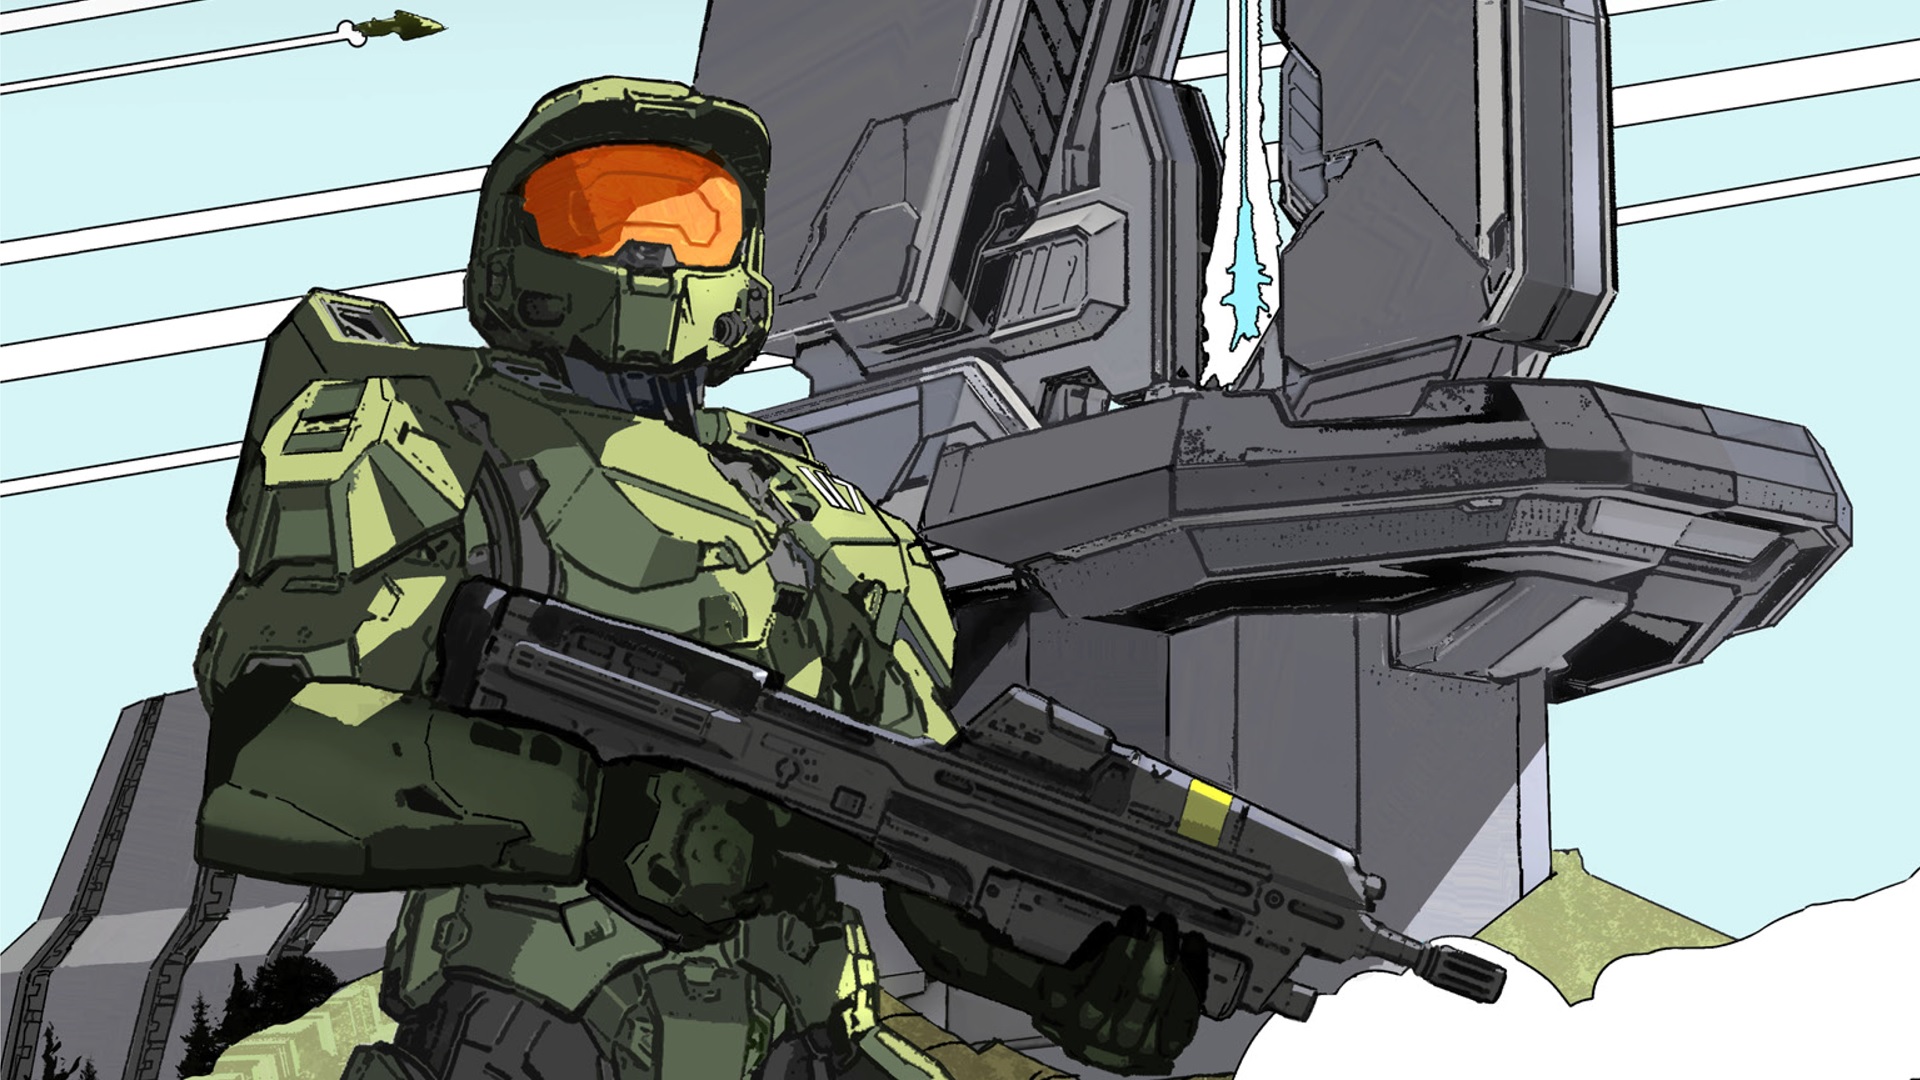 Part of the 2022 Halo Encyclopedia's cover.